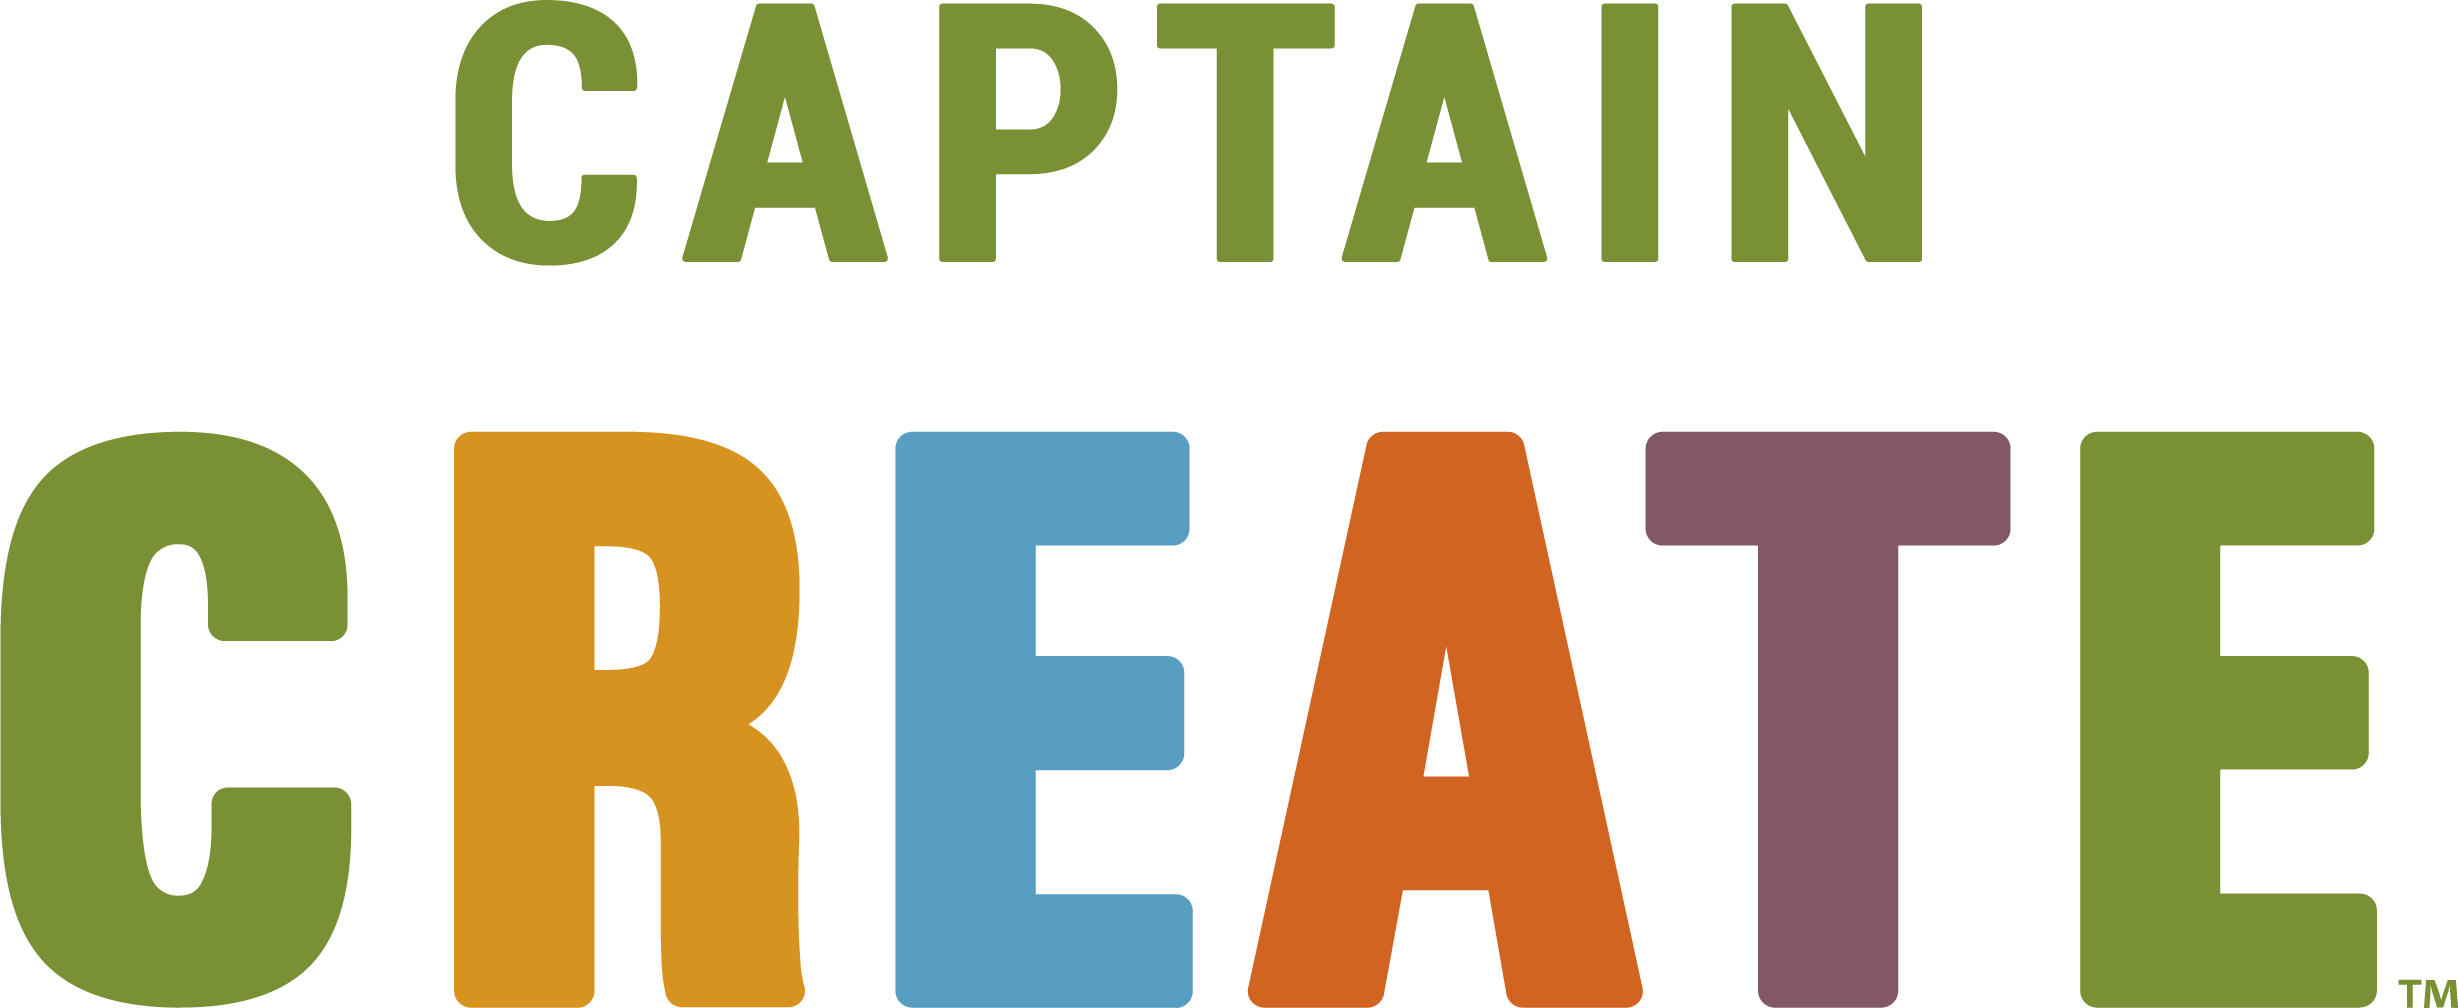 Captain Create logo with color